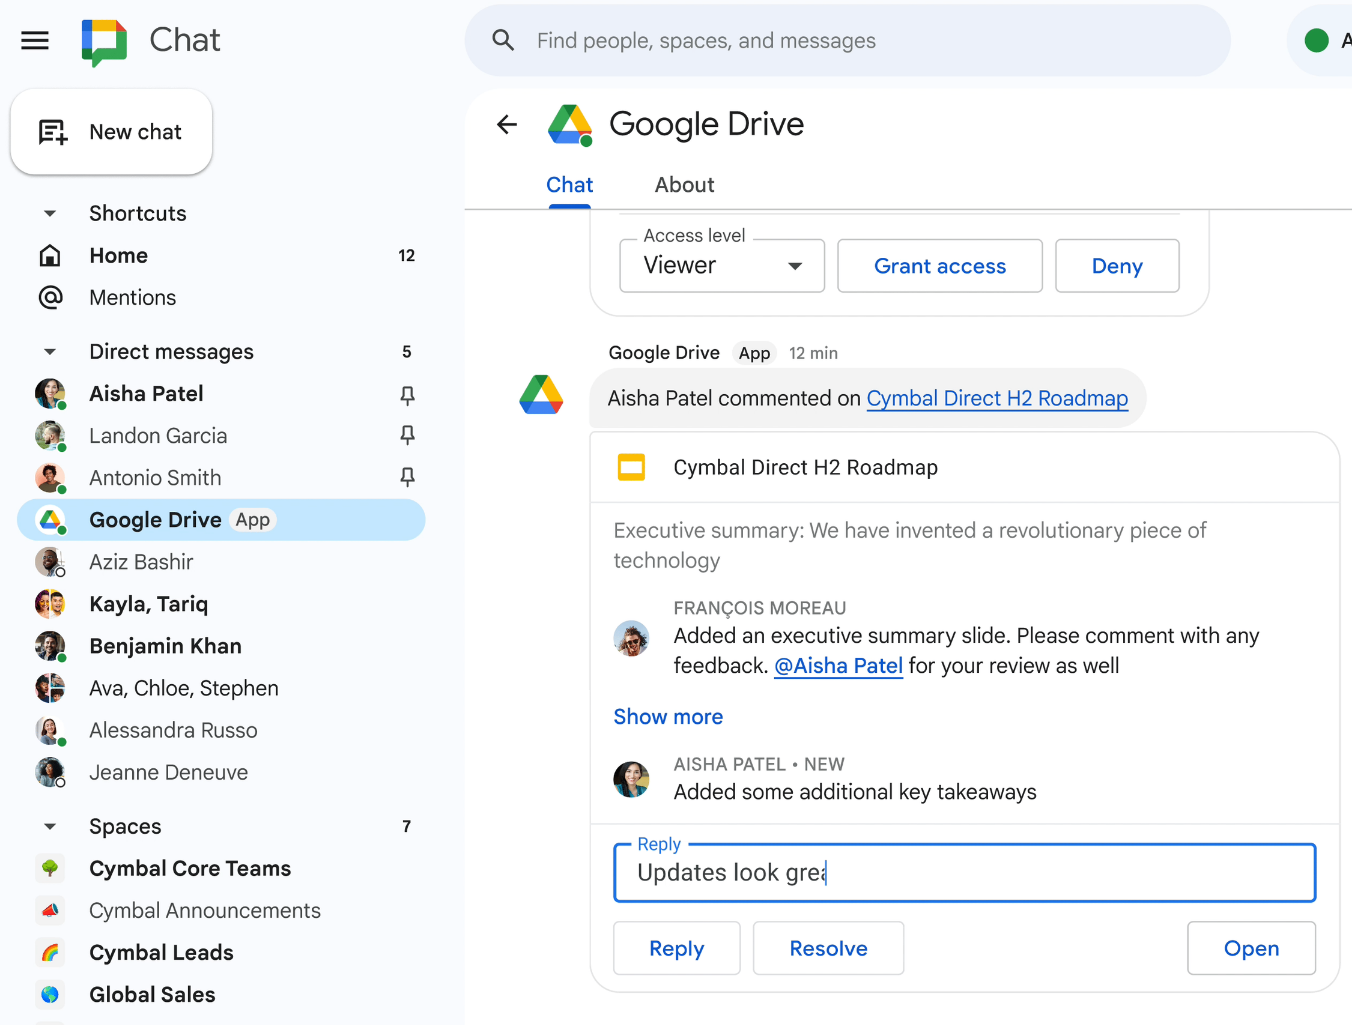 Take action on Google Drive requests and comments directly in Google Chat